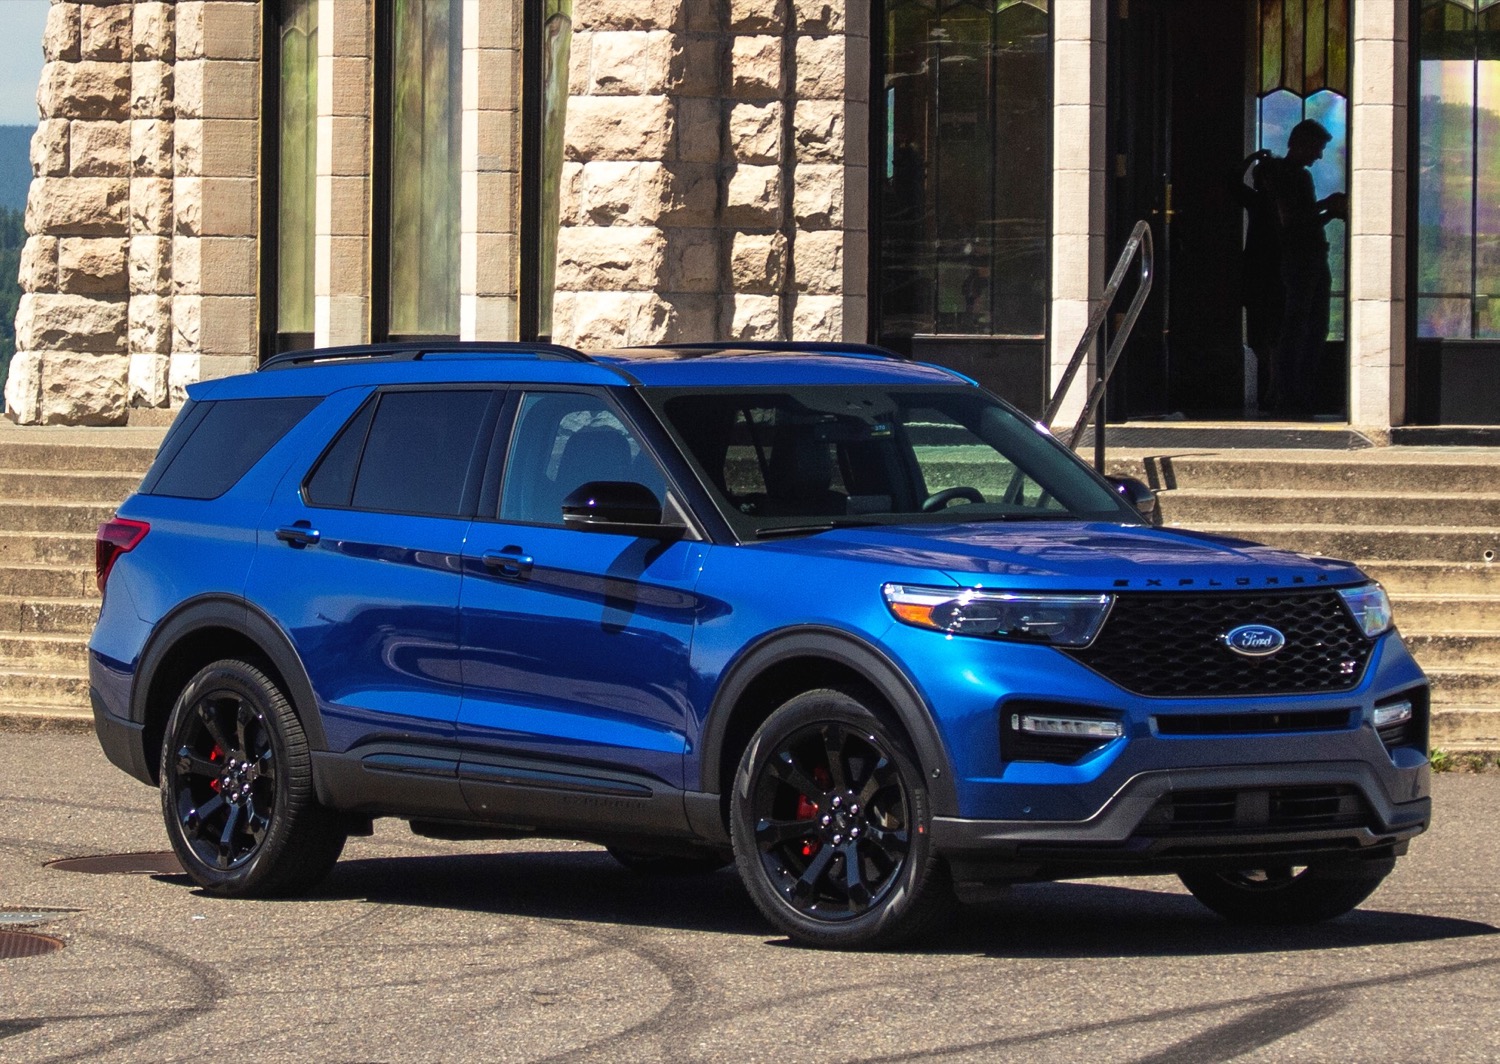 2021 Ford Explorer St Will Receive Interior Enhancements